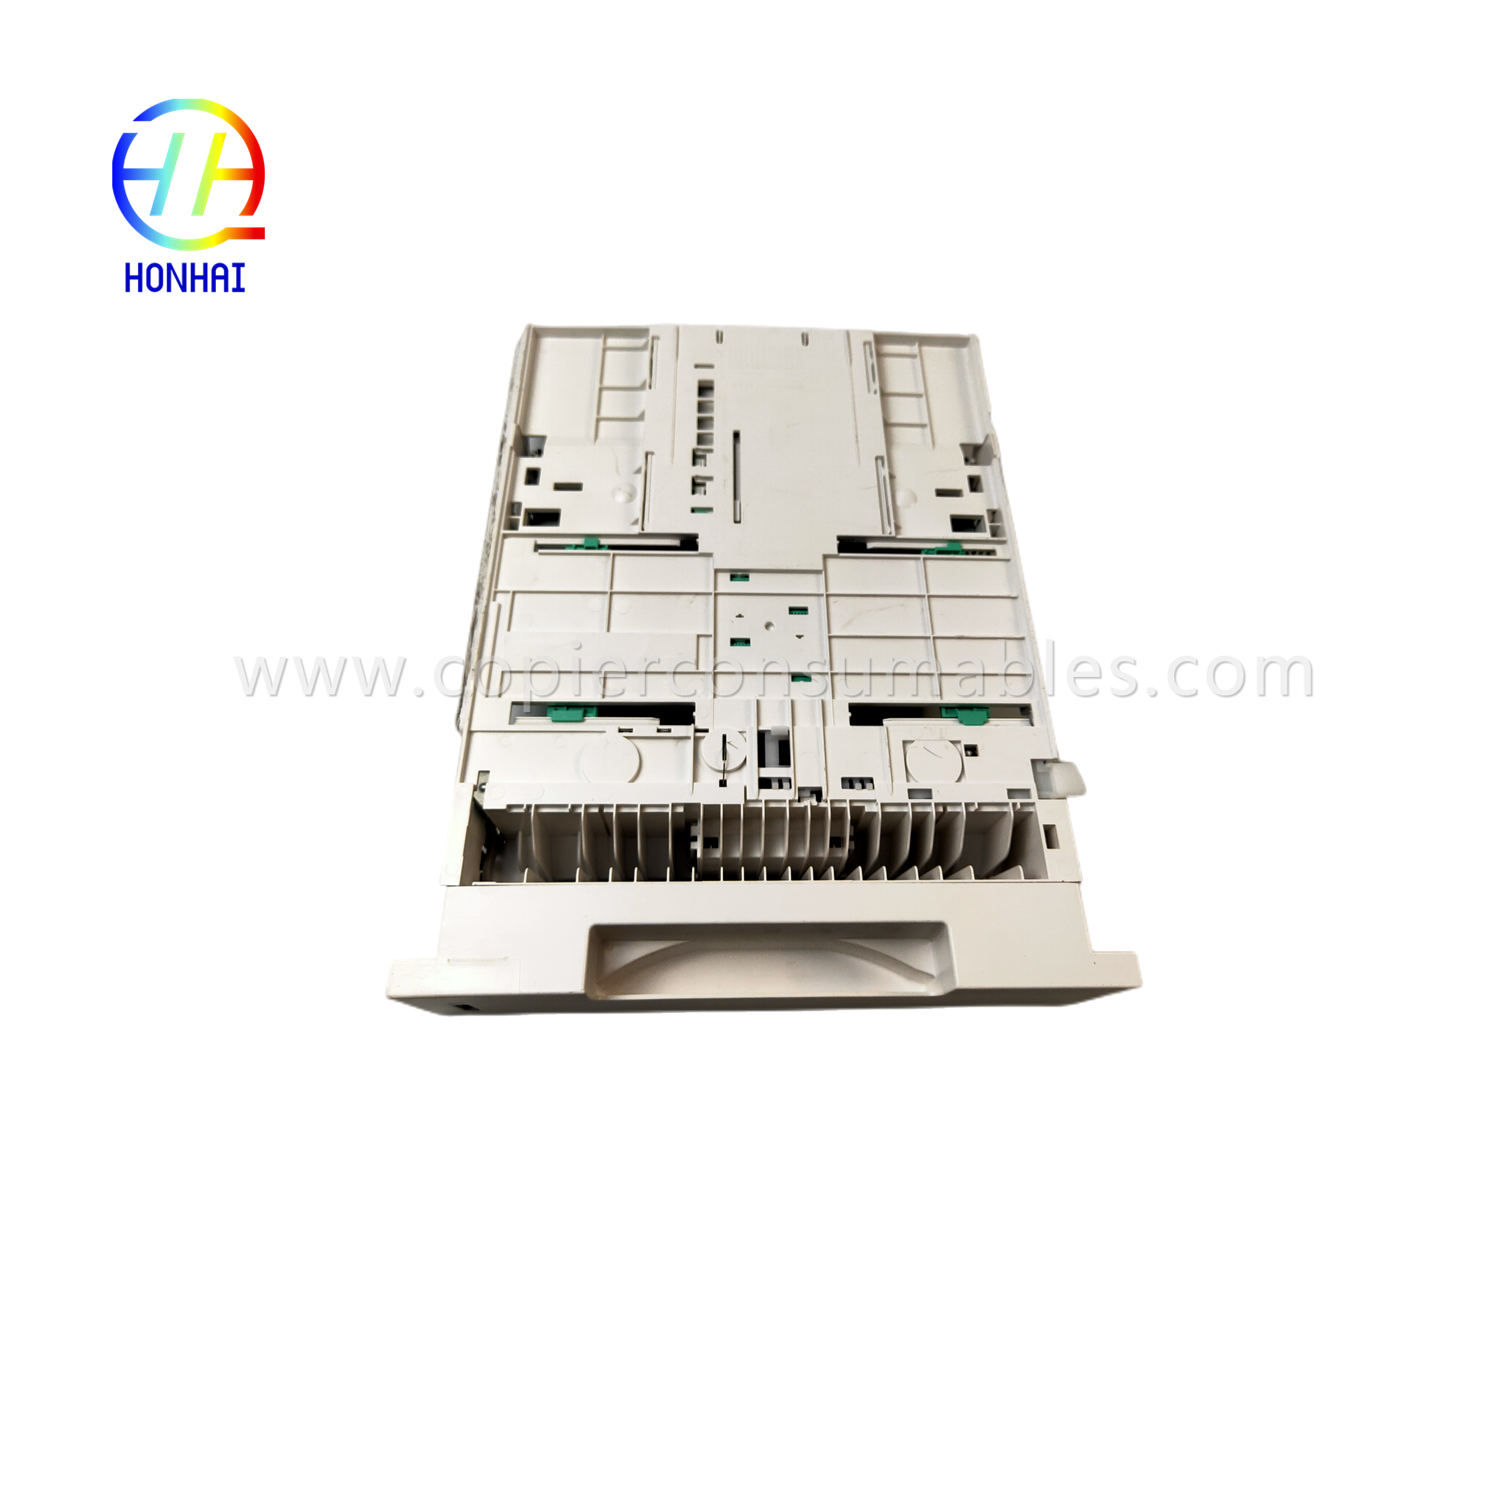 https://c585.goodo.net/paper-tray-assembly-for-xerox-phaser-3320dni-workcentre-3315dn-3325dni-050n00650-cassette-paper-tray-product/